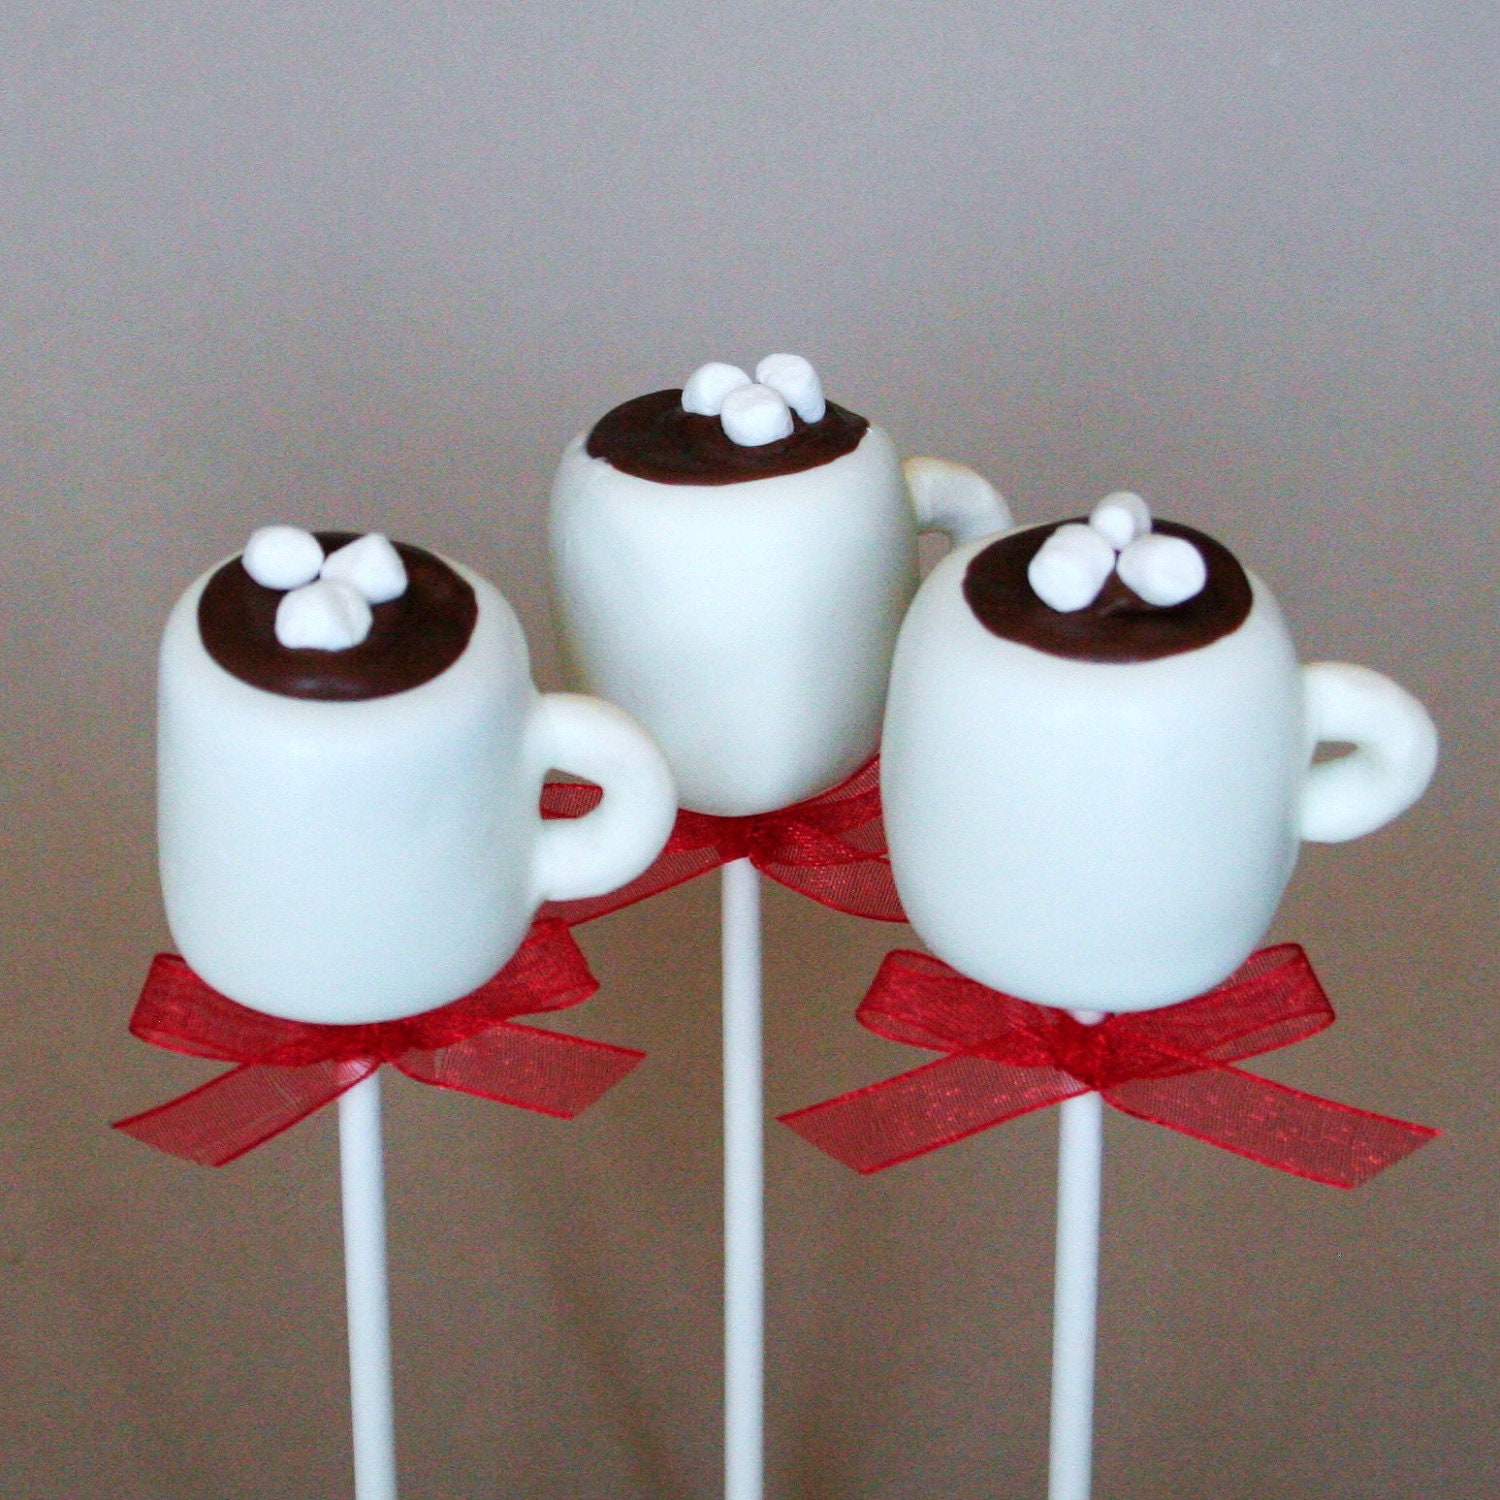 12 Hot Chocolate or Coffee Mug Cake Pops - for snow days, winter party favors, hostess or teacher gift, stocking stuffers, Santa